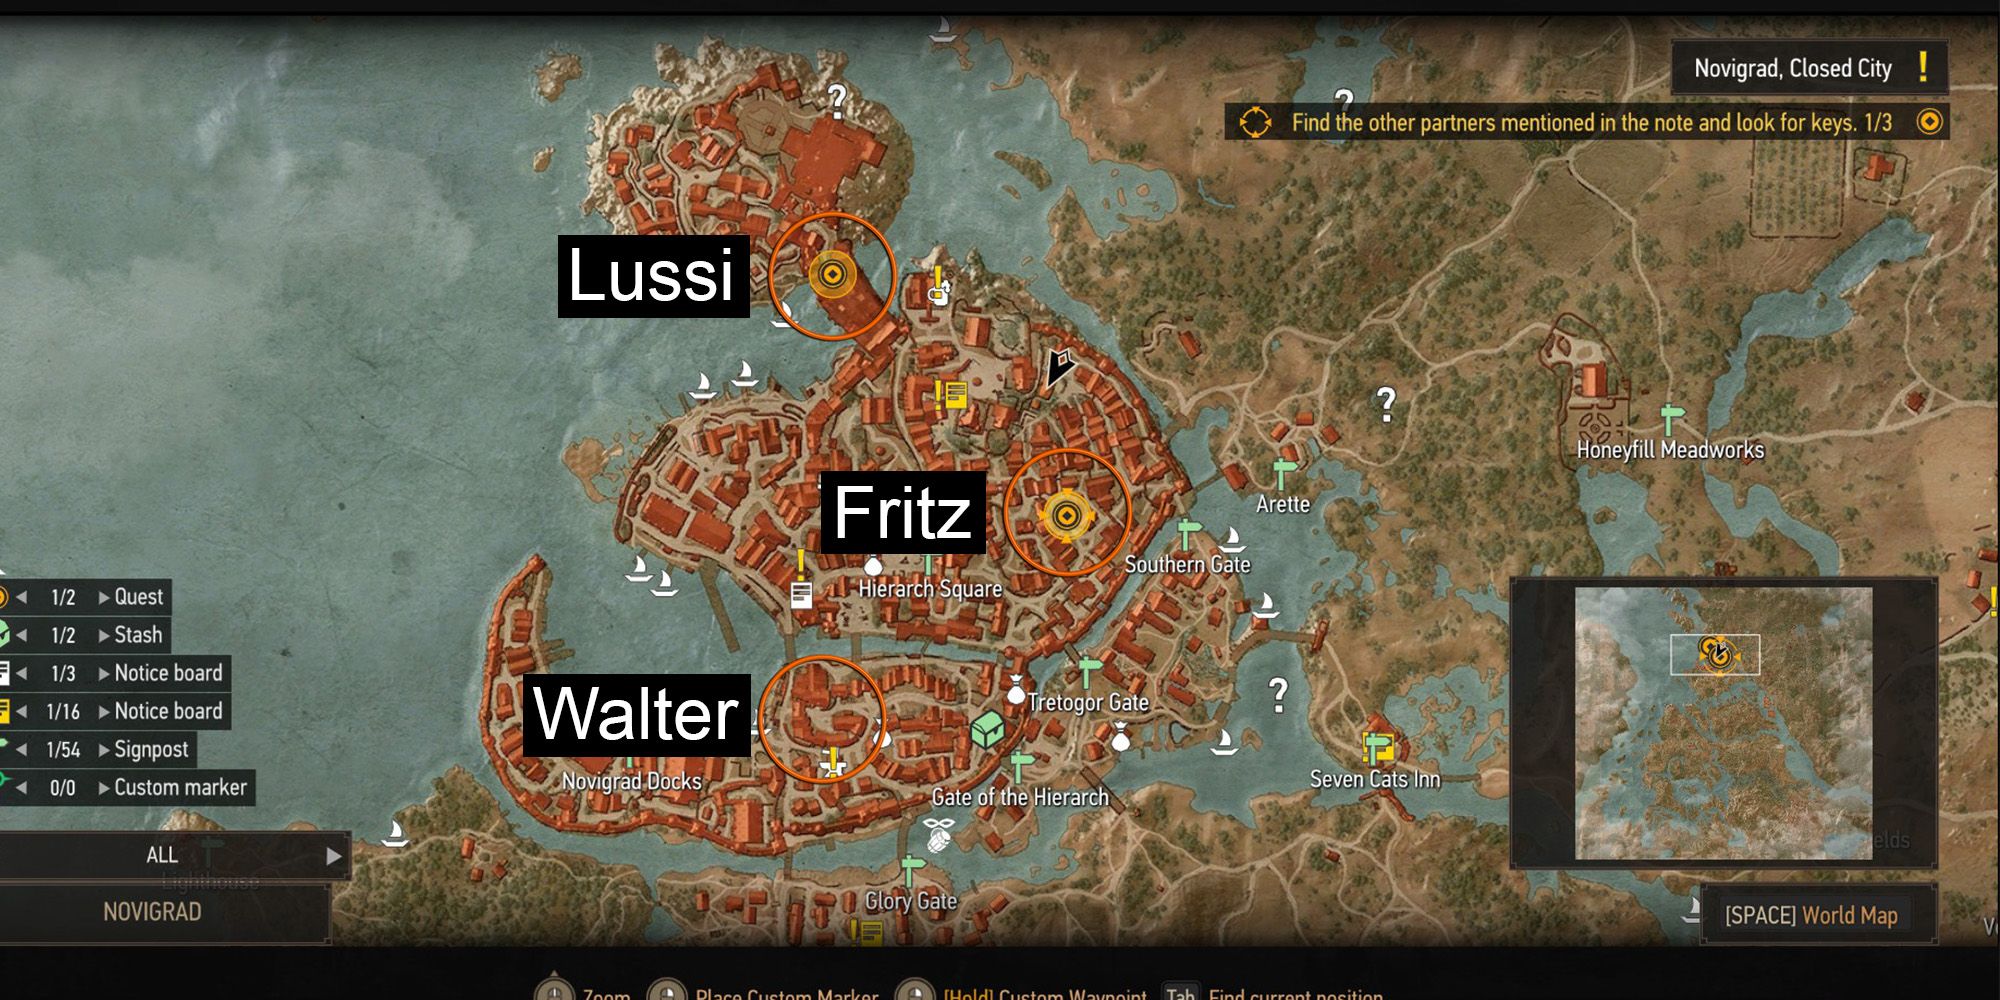 An annotated screenshot of a map of Novigrad in The Witcher 3 showing three locations where you can get quest items.